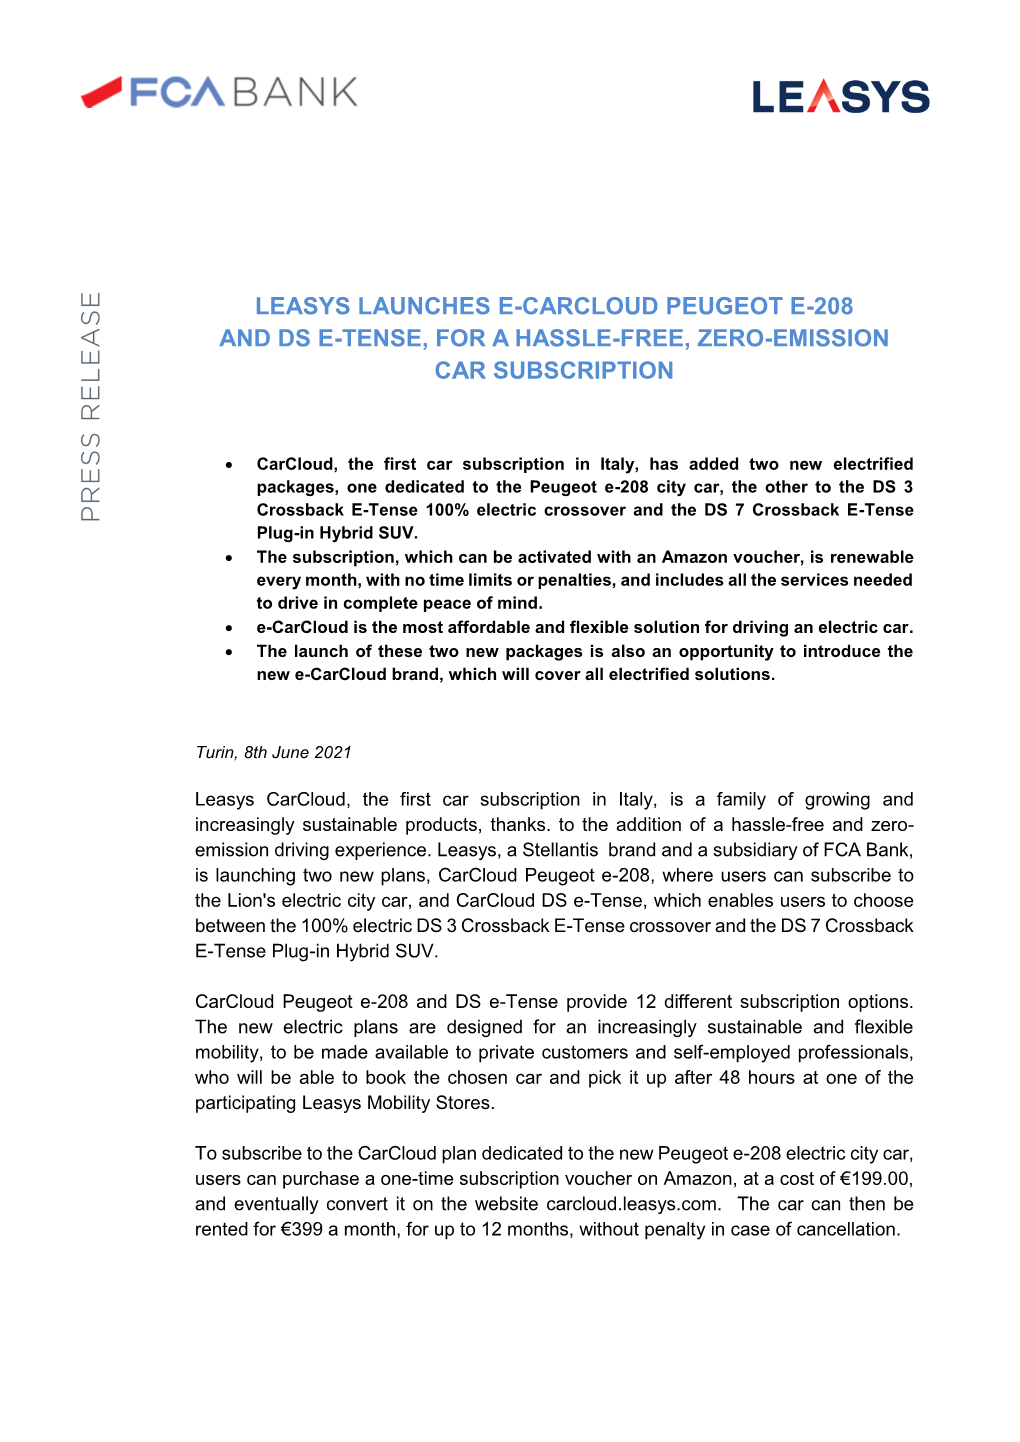 08 JUNE 2021 Leasys Launches E-Carcloud Peugeot E-208 and DS